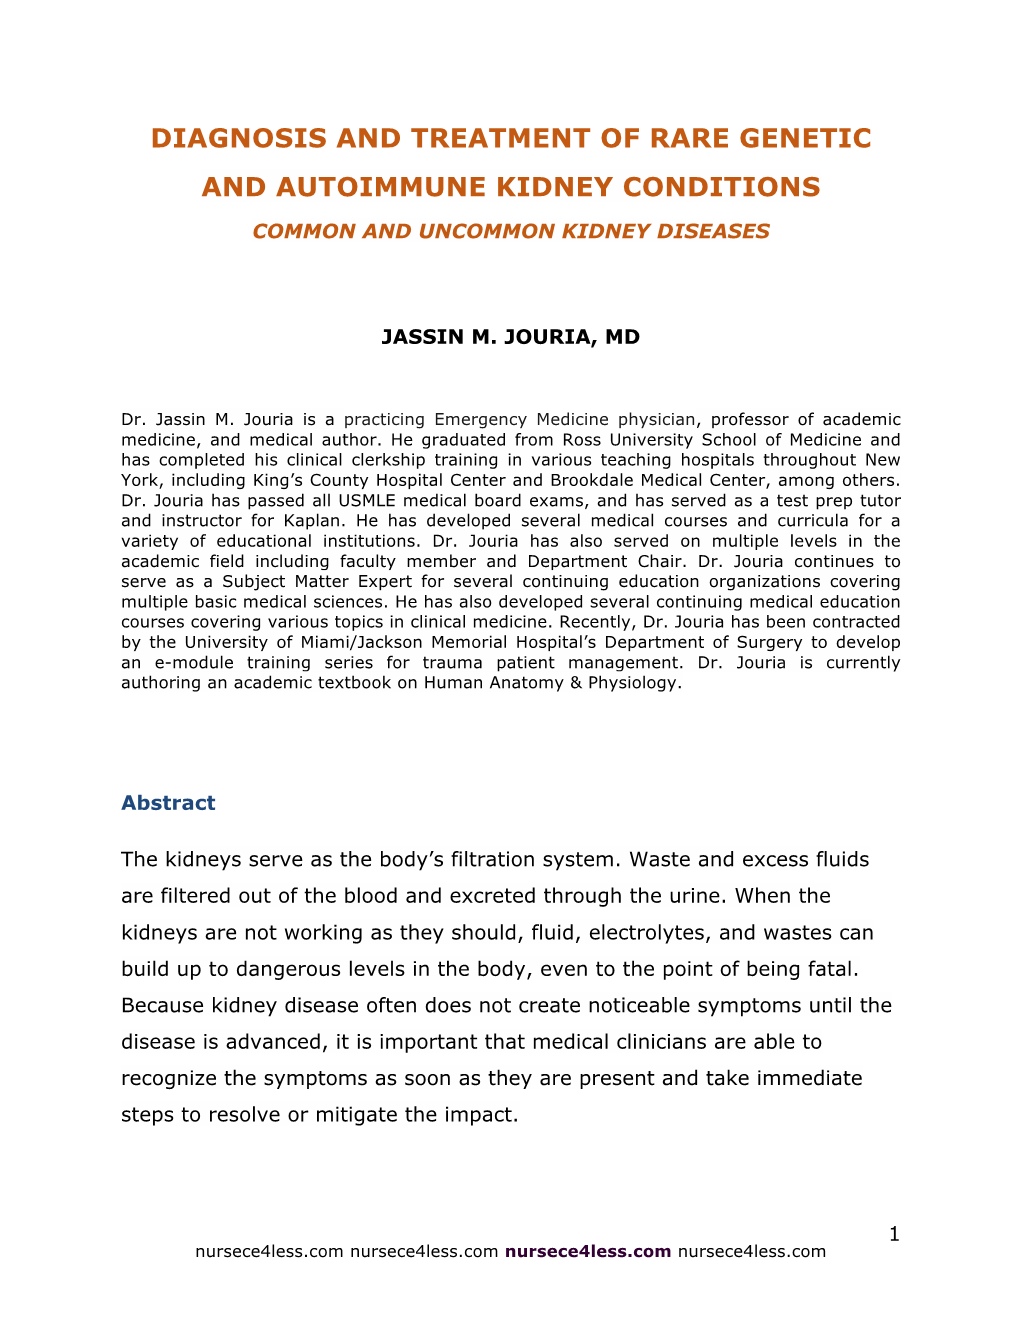 Diagnosis and Treatment of Rare Genetic and Autoimmune Kidney Conditions Common and Uncommon Kidney Diseases